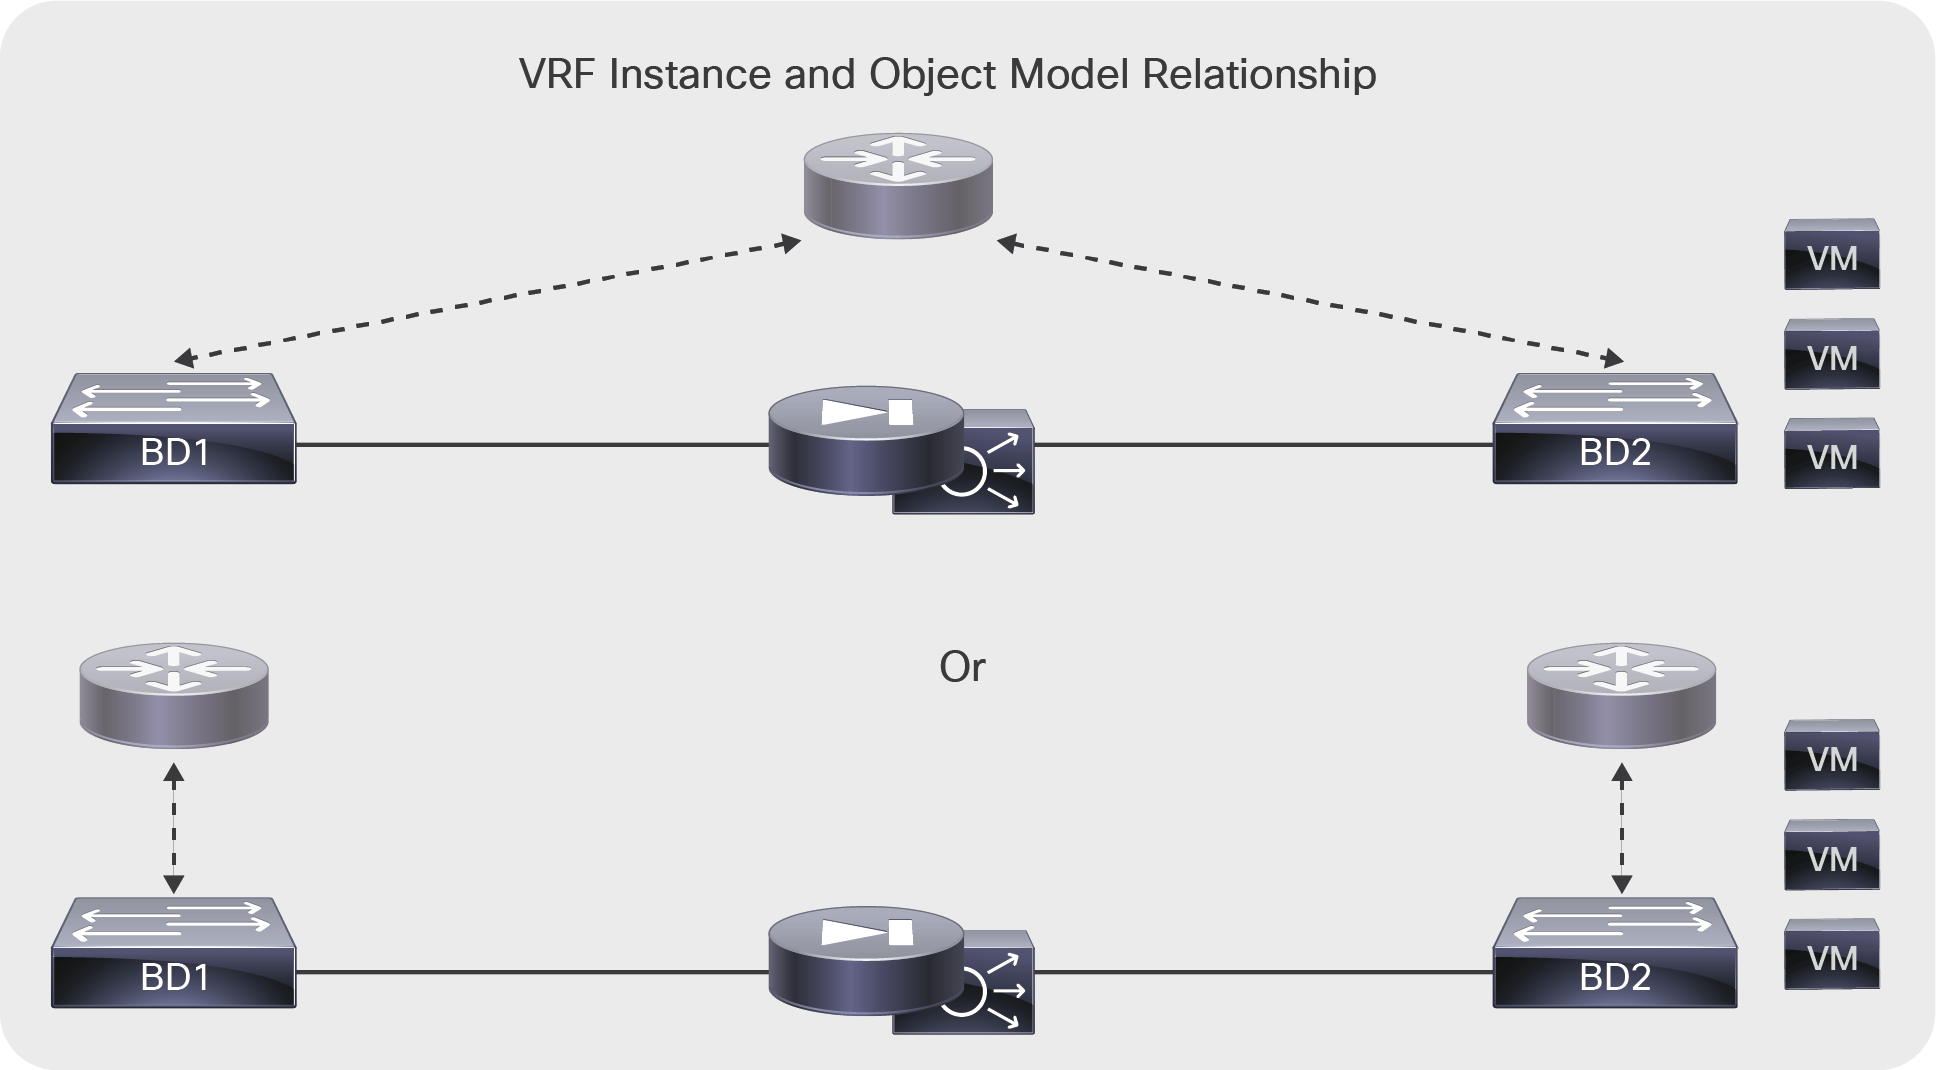 The bridge domain requires a relationship with a VRF instance, and in some designs you may need to allocate one VRF instance per bridge domain